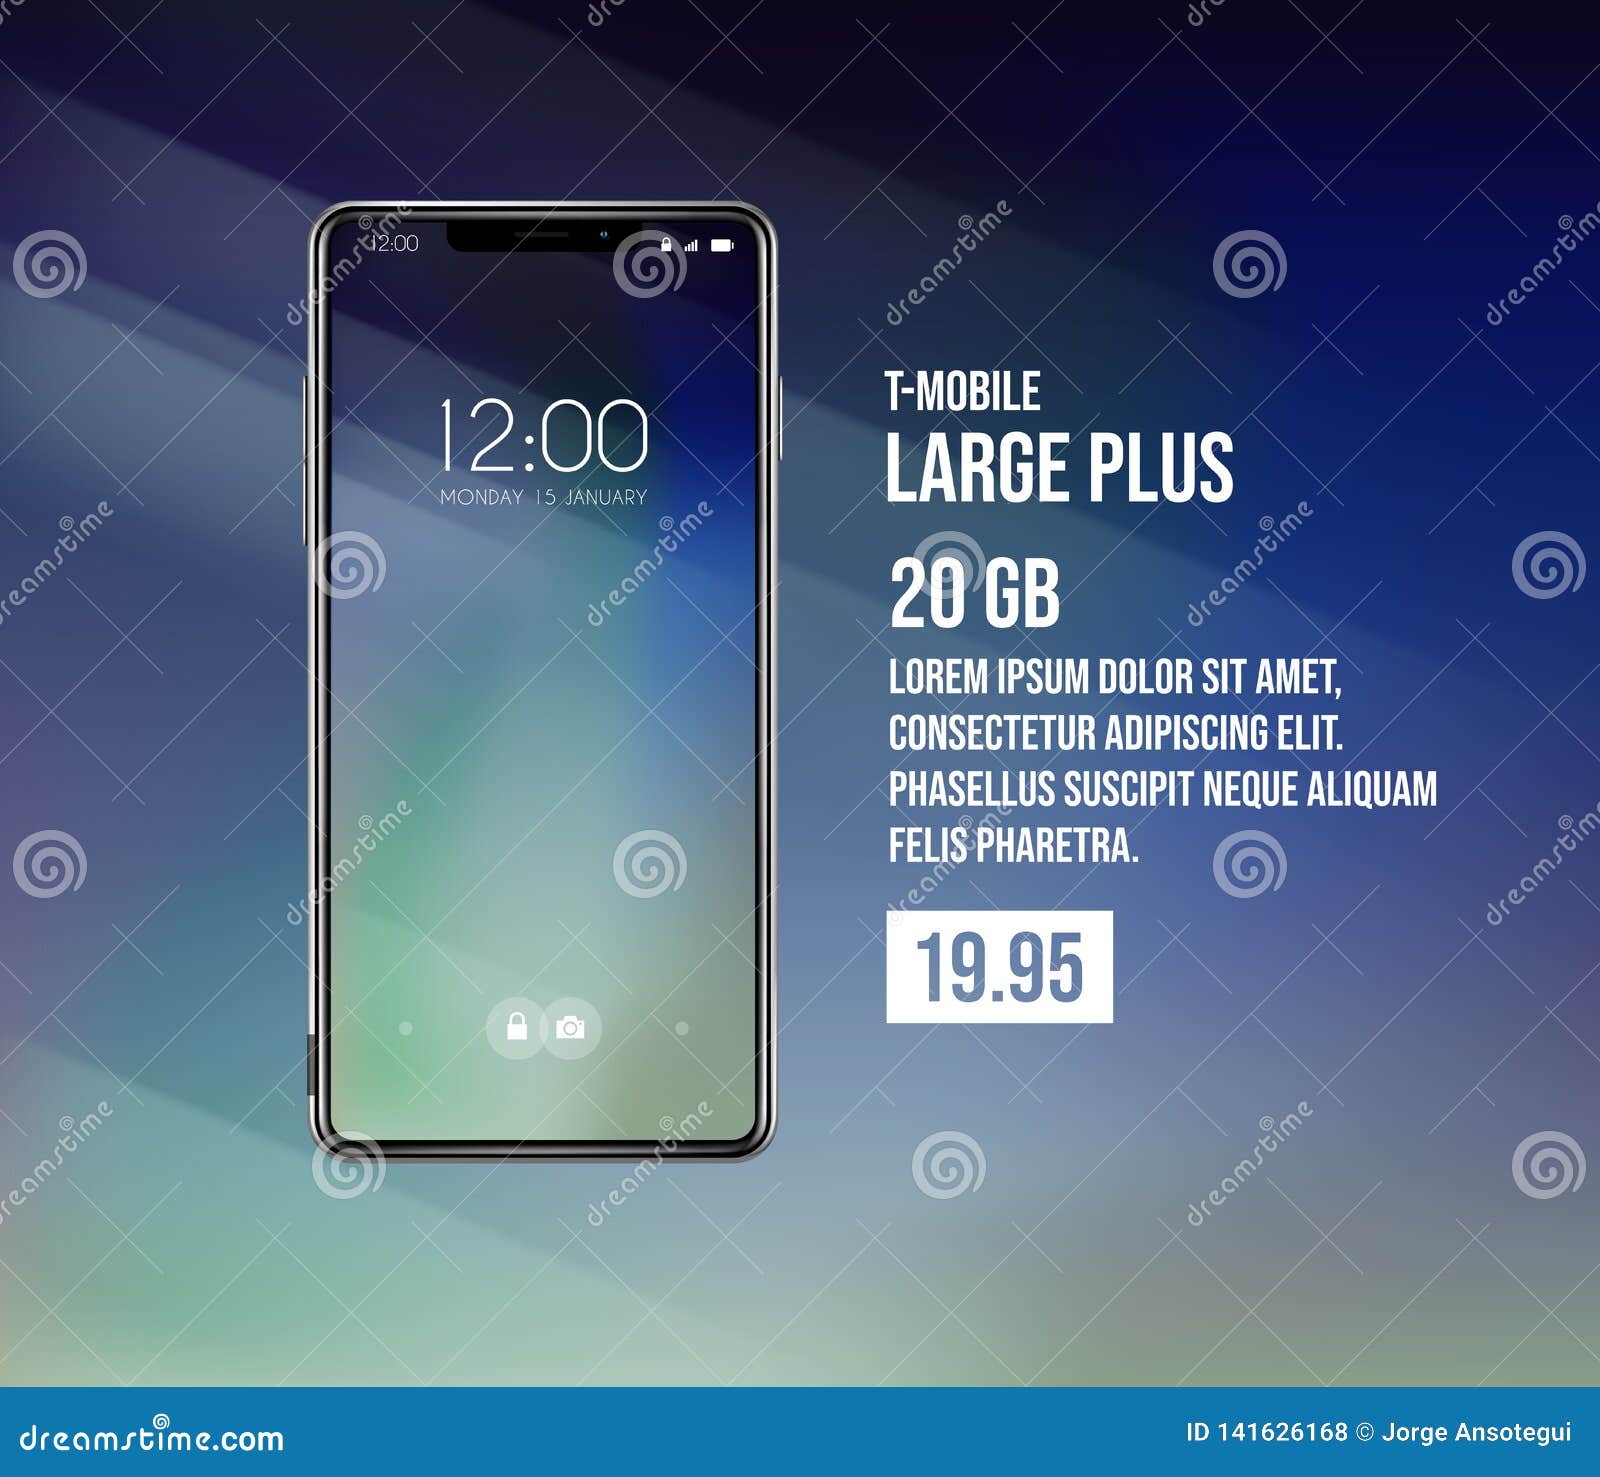 new front smartphone, phone plans concept prototype with advertisment background. mobile with background and hour screen. mockup